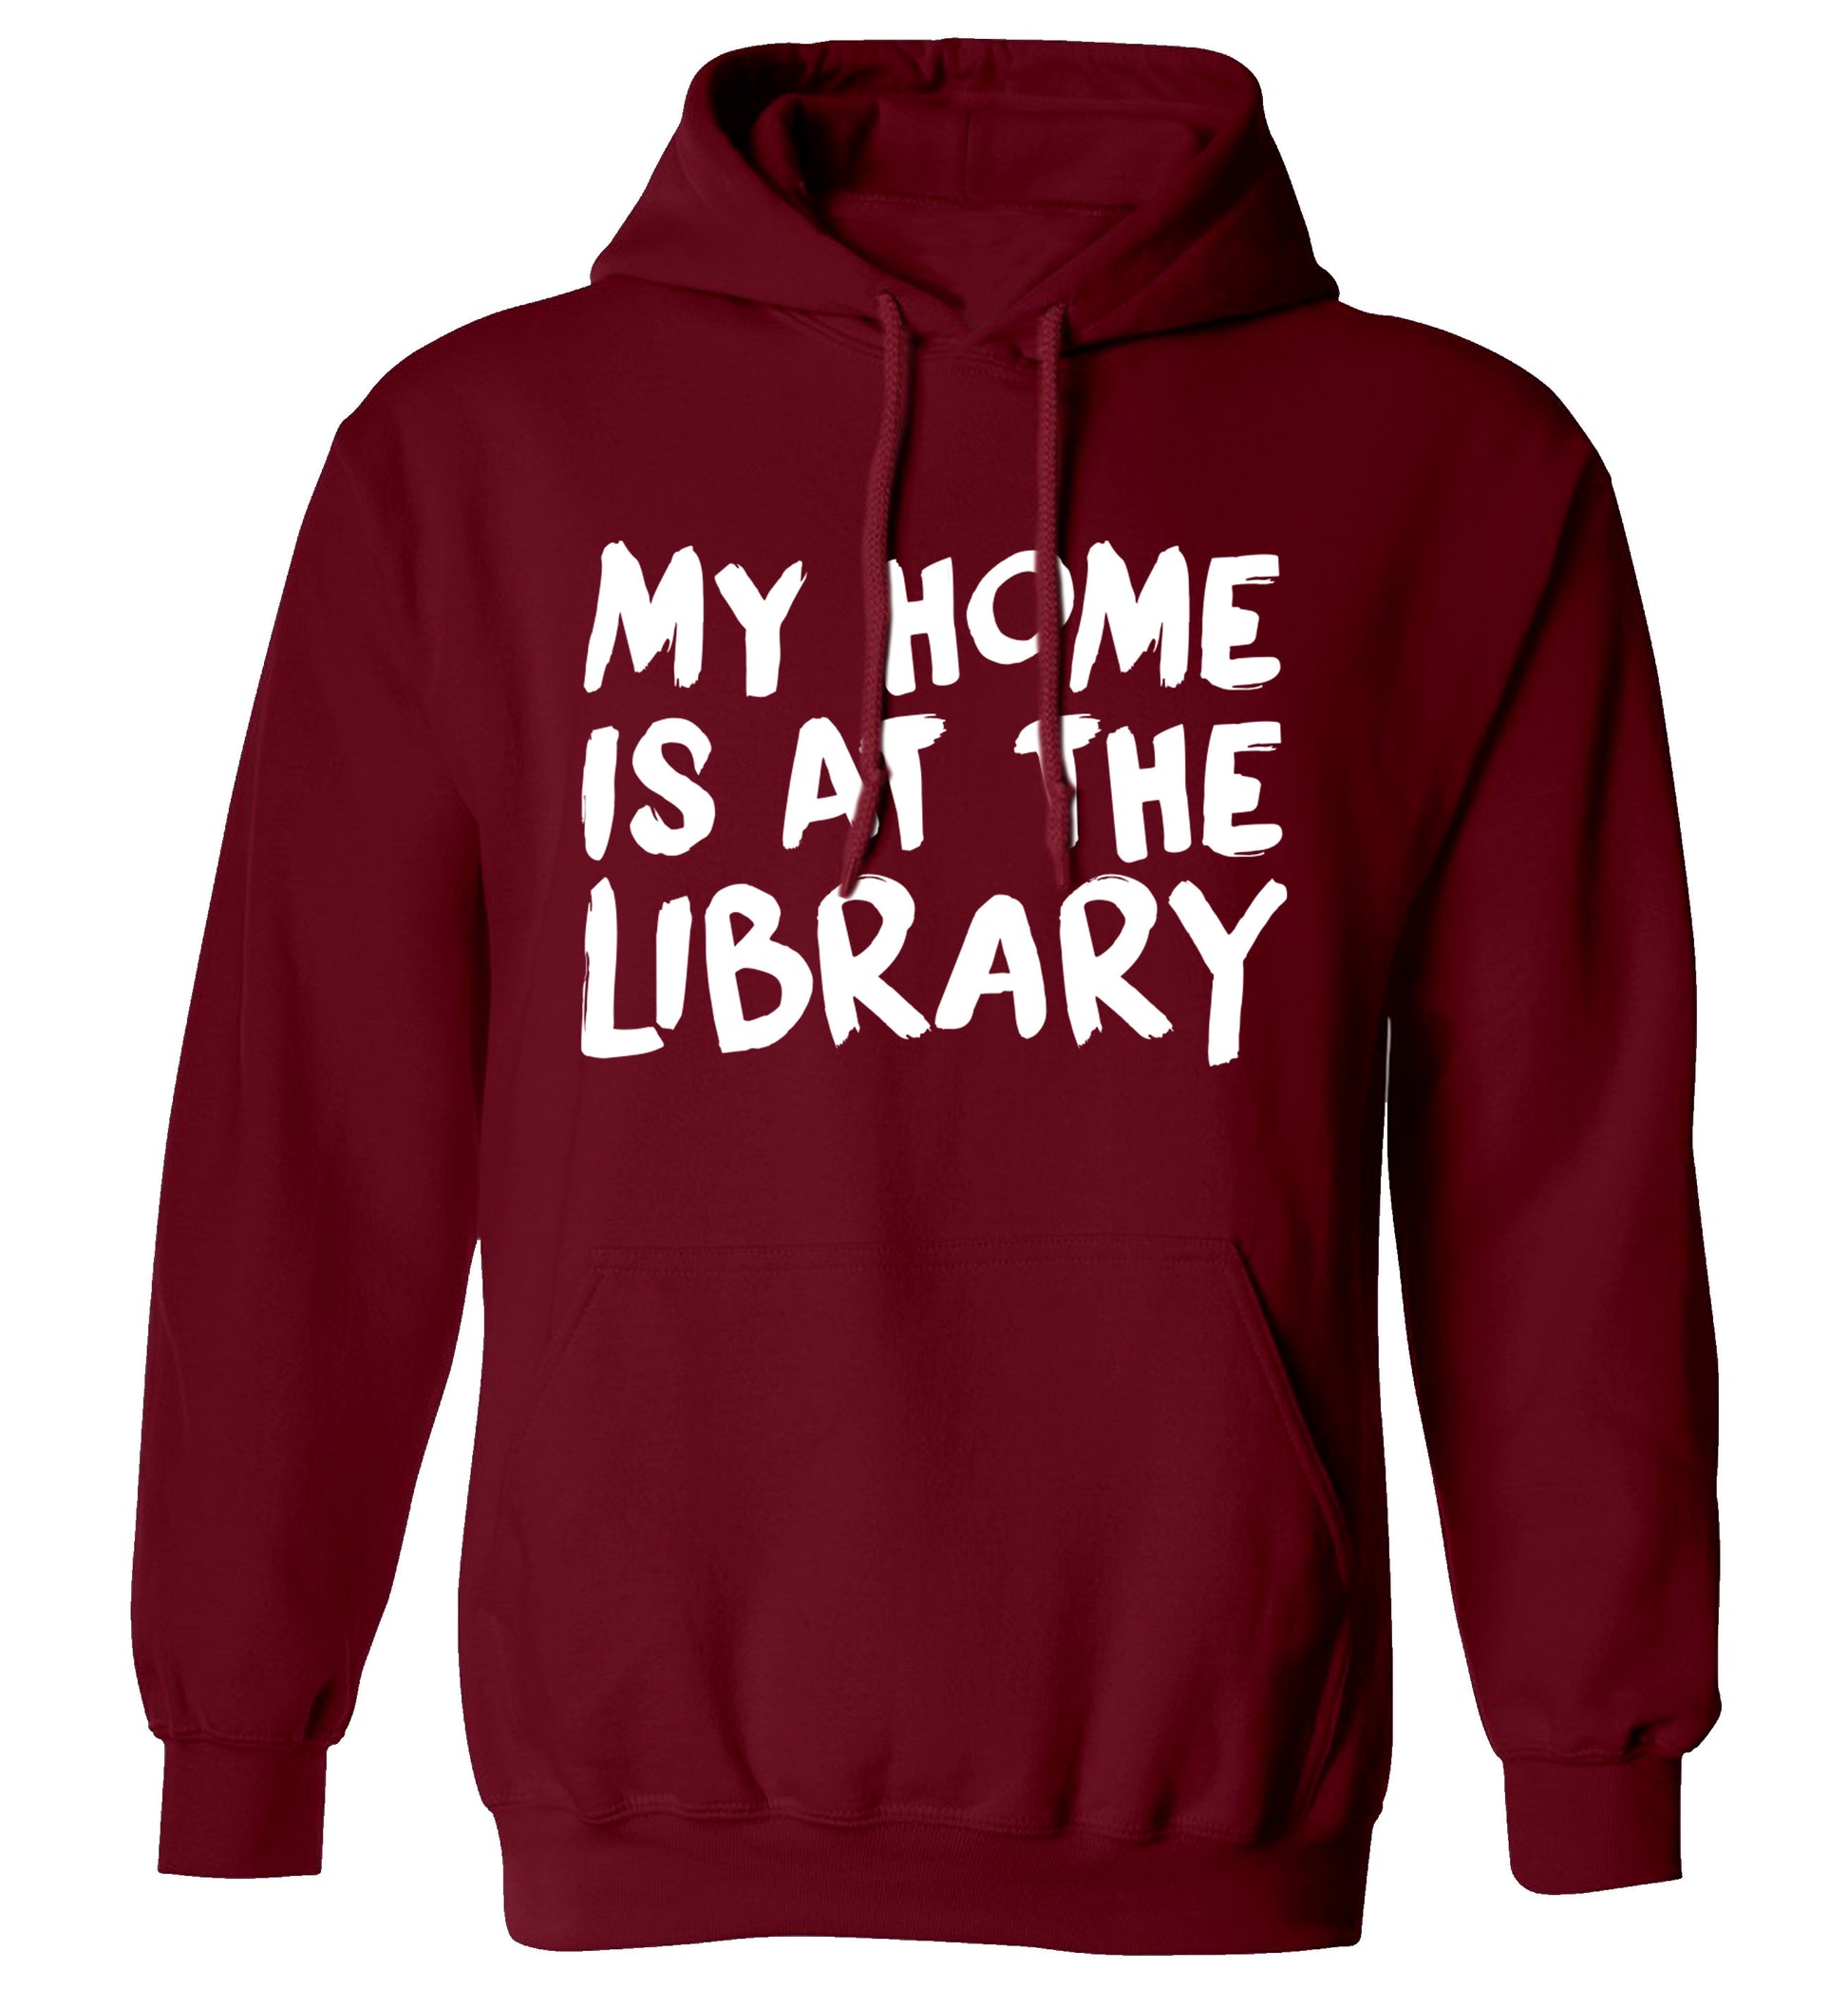 My home is at the library adults unisex maroon hoodie 2XL